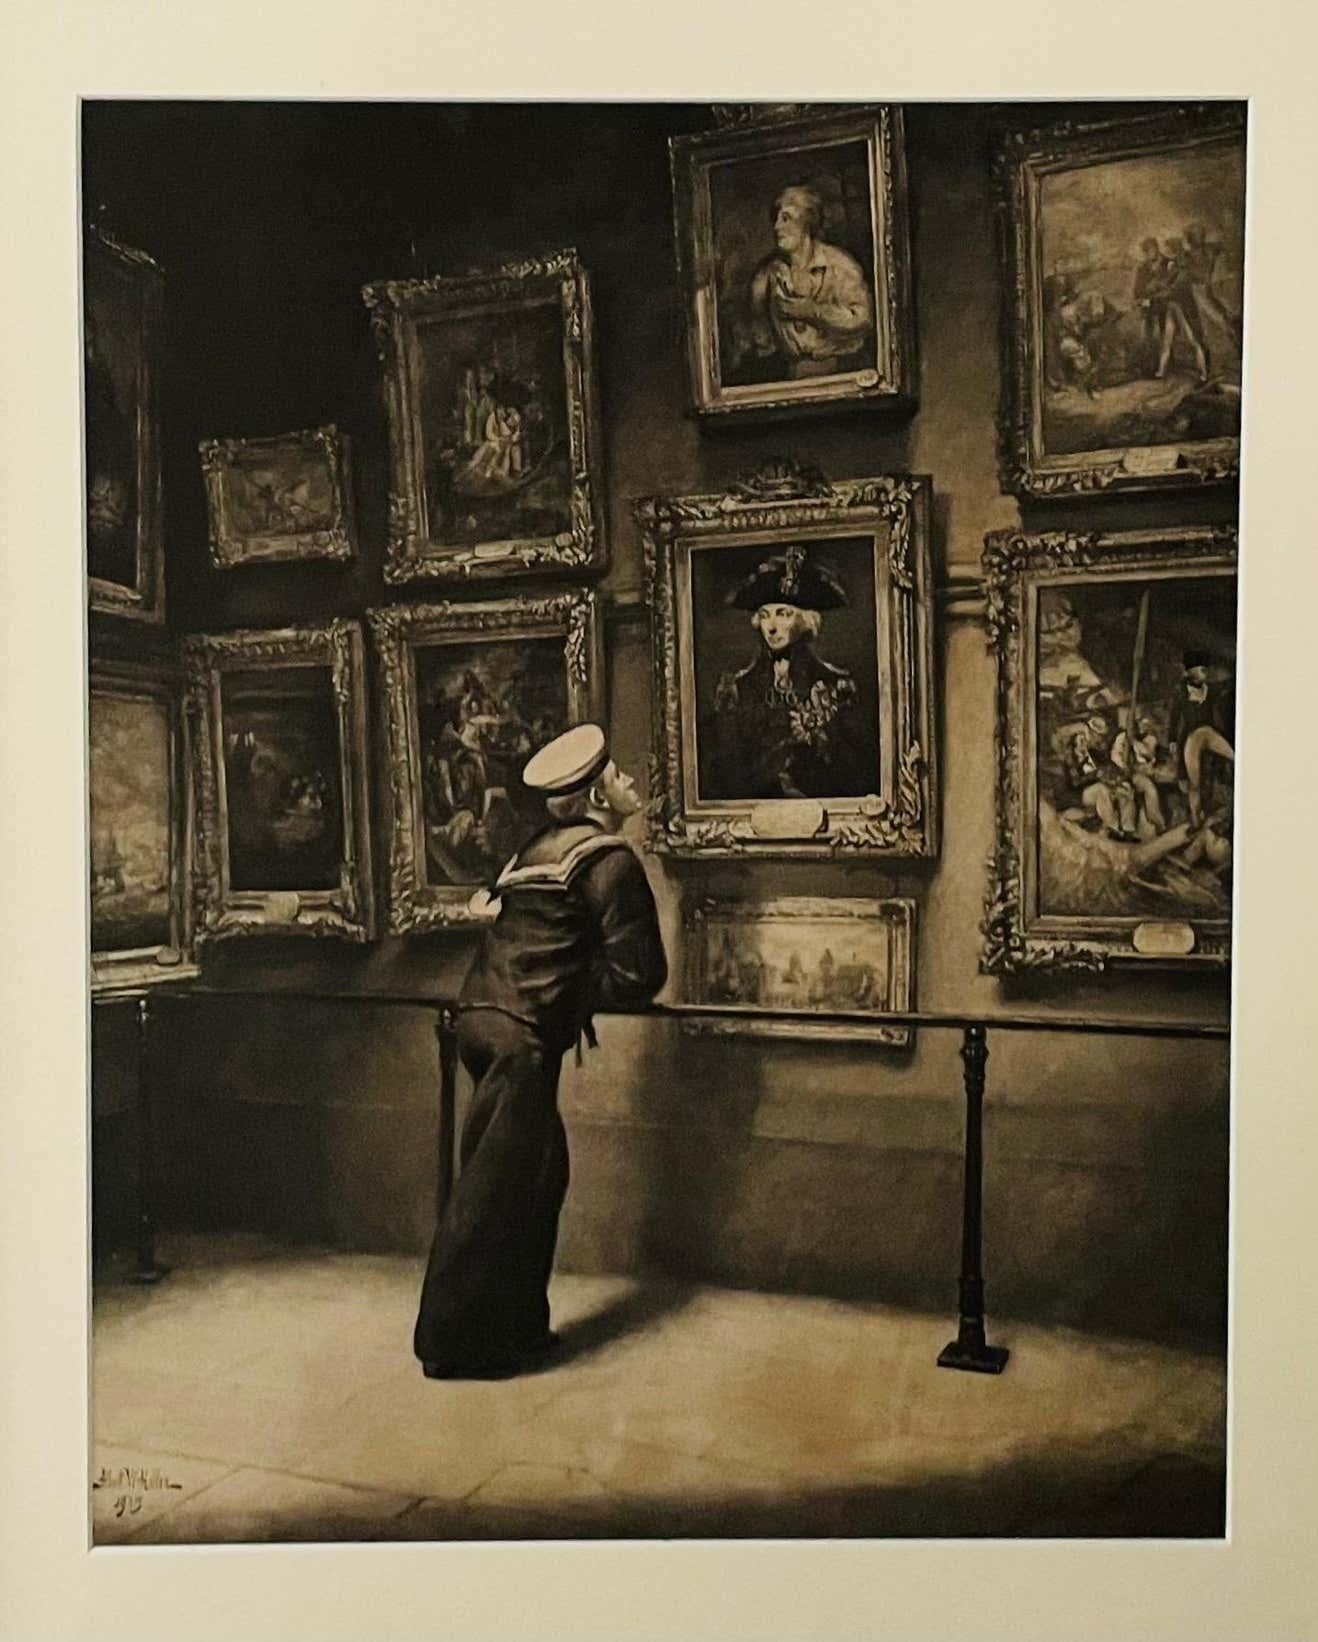 One hundred years ago 1805-1905 original print signed and dated 1905 by Albert w holden (British, 1848-1932) features a royal naval seaman admiring portraits and art wall in the former Nelson Room in the painting hall of the royal naval college in